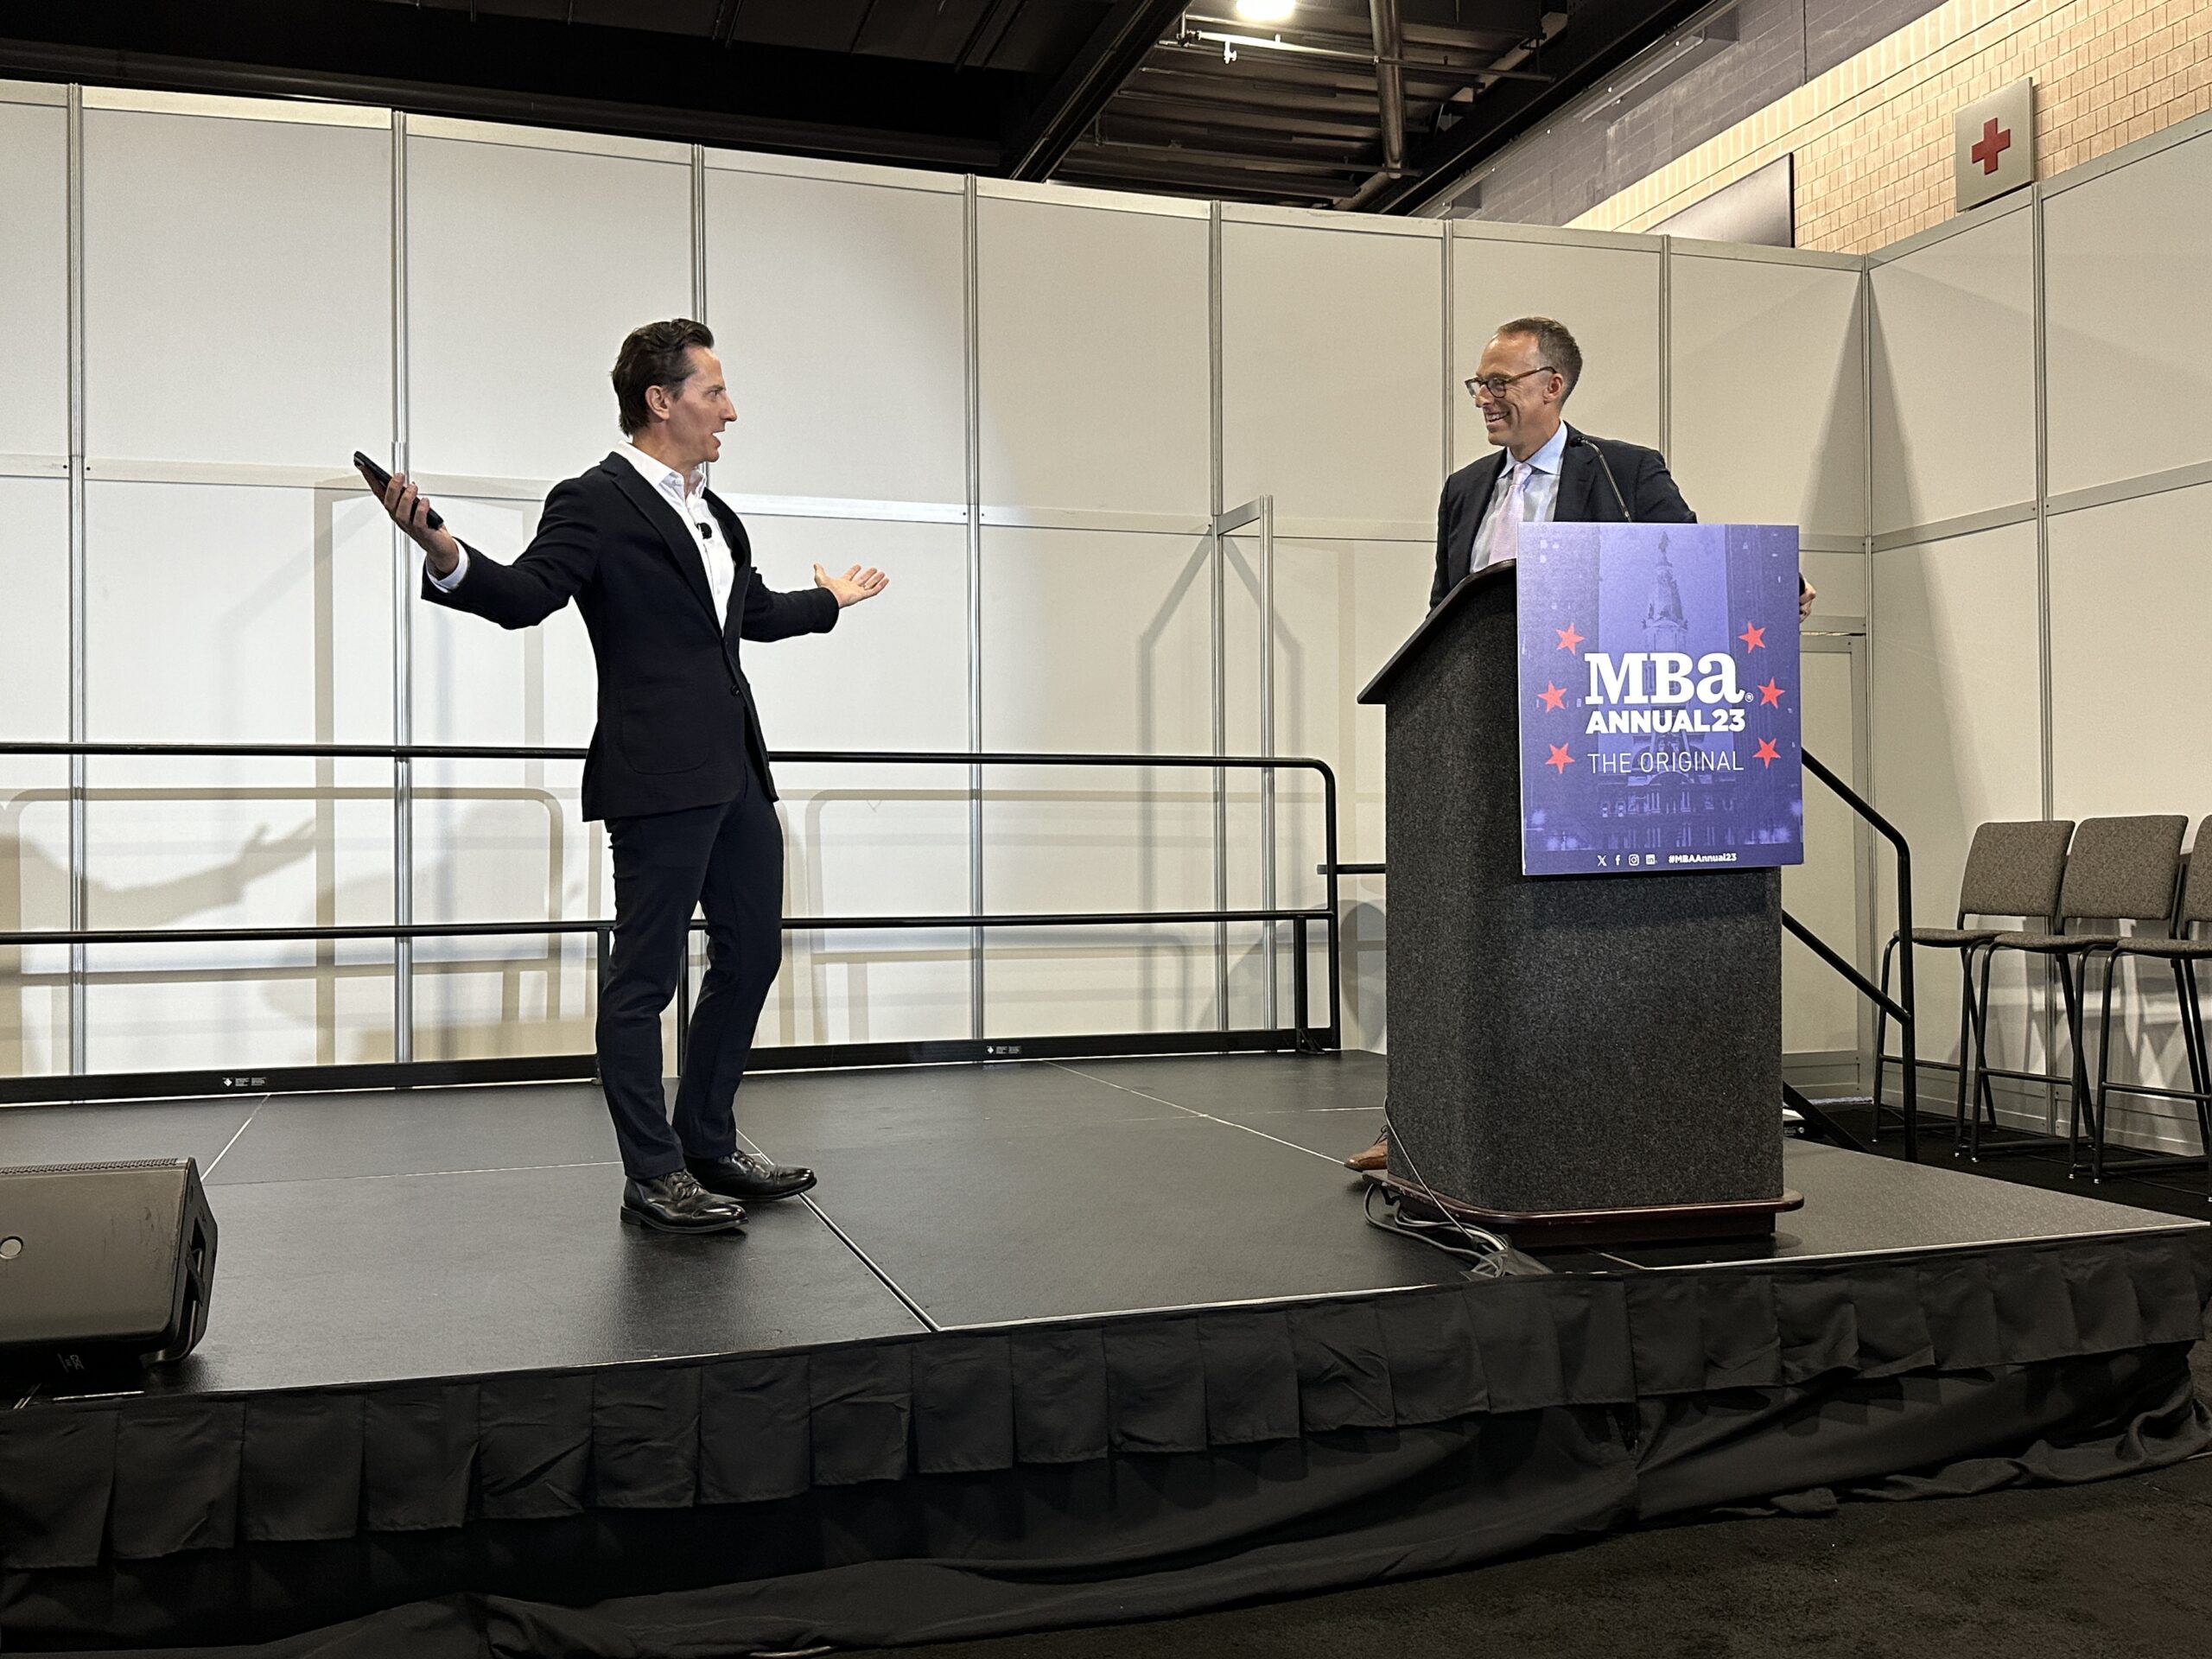 Julian Hebron On-Stage Feedback for LendingPad Dan Smith at Mortgage Technology Showcase, MBA Annual 2023 - The Basis Point